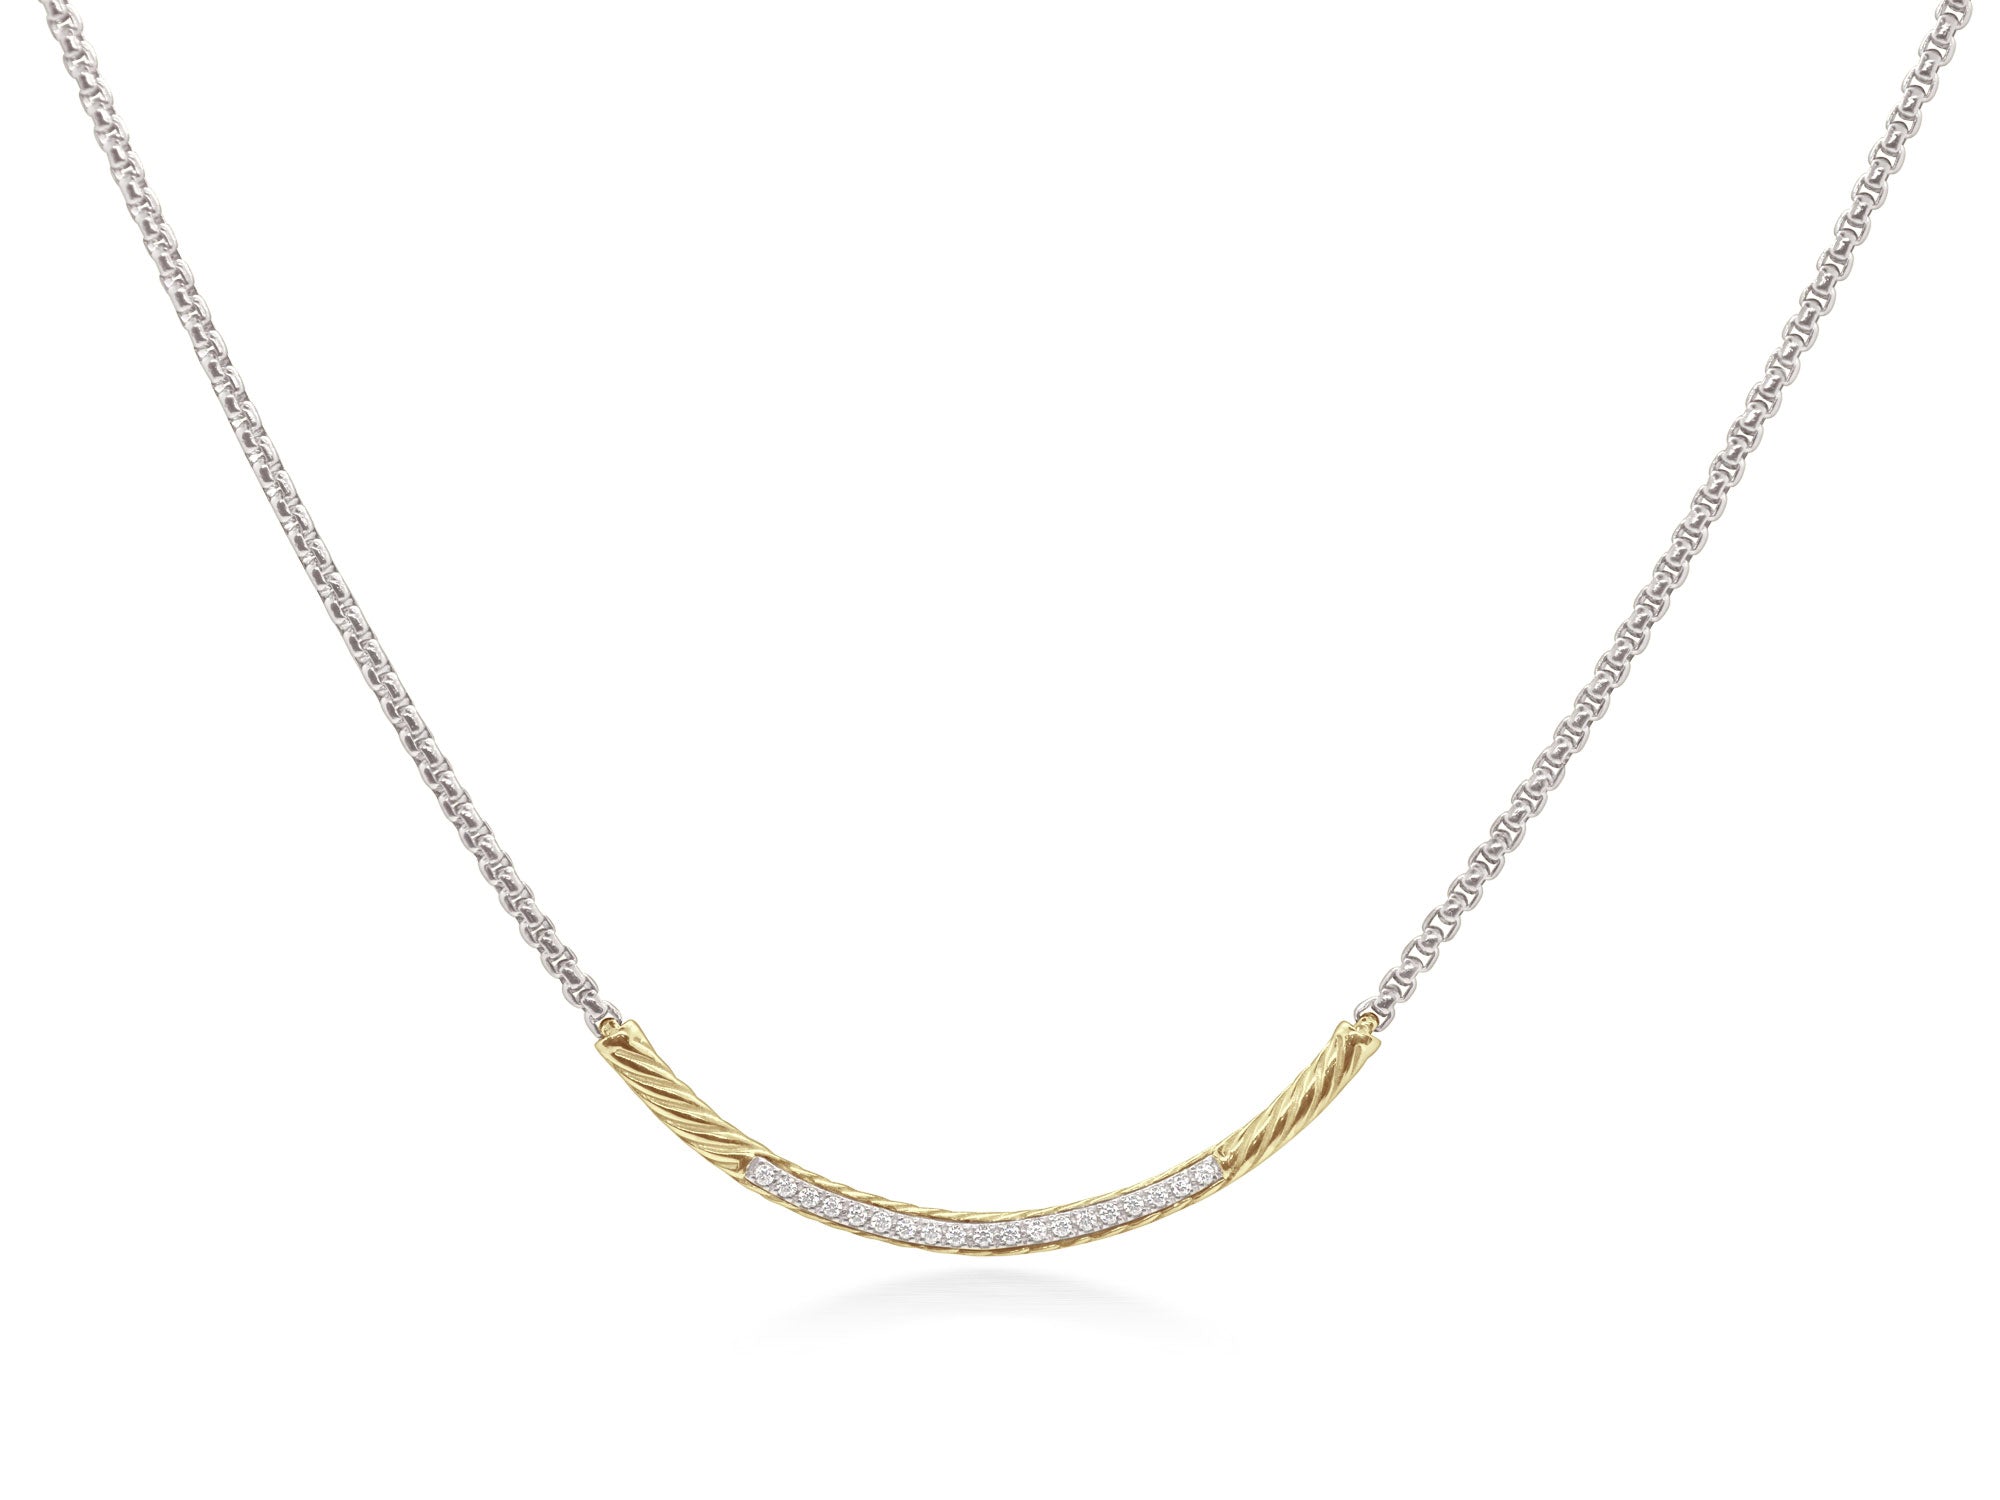 Grey Chain Curved Bar Necklace with Diamonds